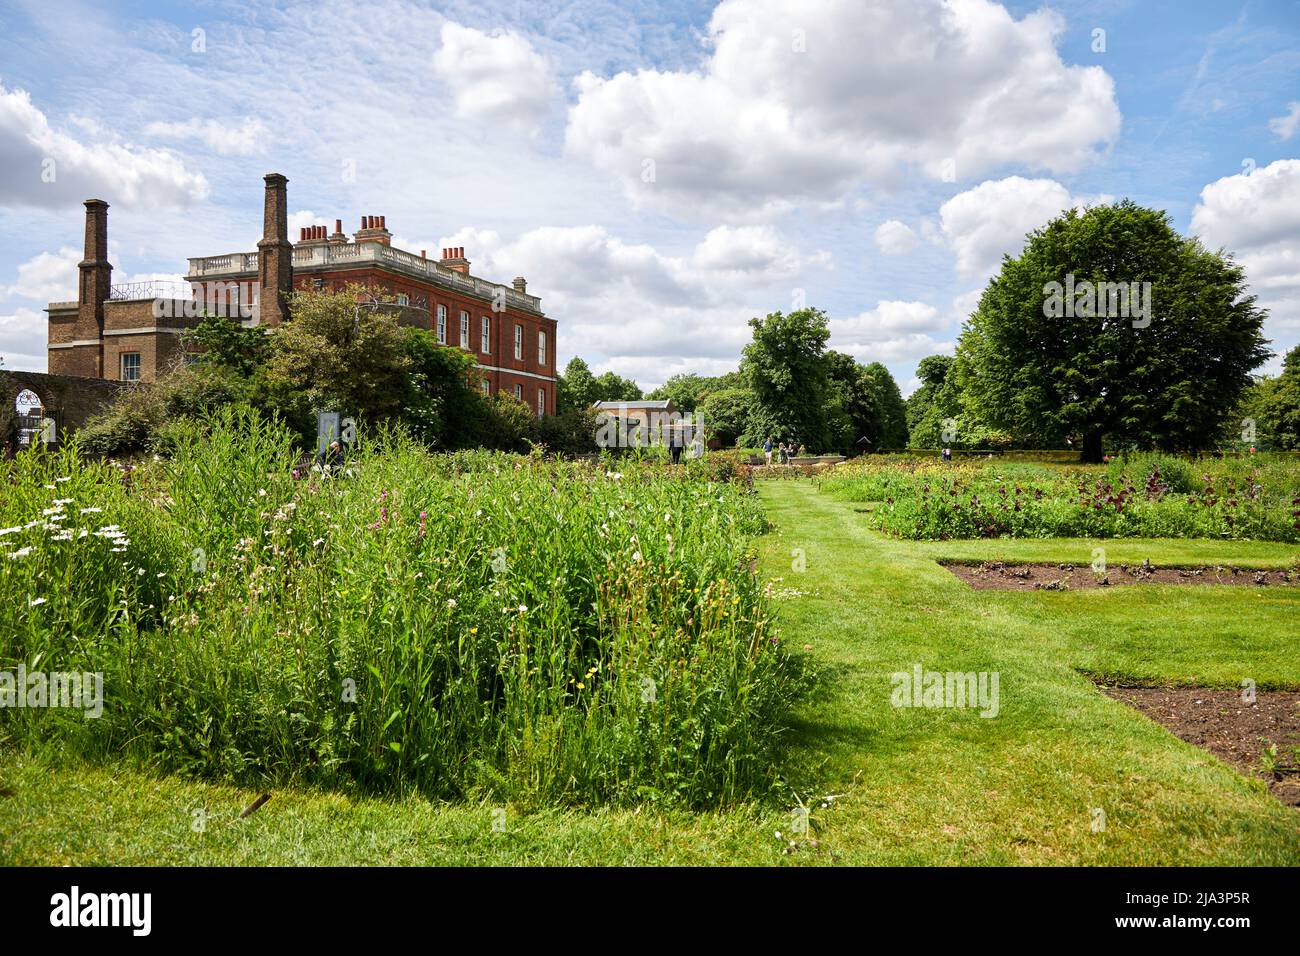 The Rangers's House, Greenwich Park, London, used as the main residence in Netflix's hit series Bridgerton. Stock Photo